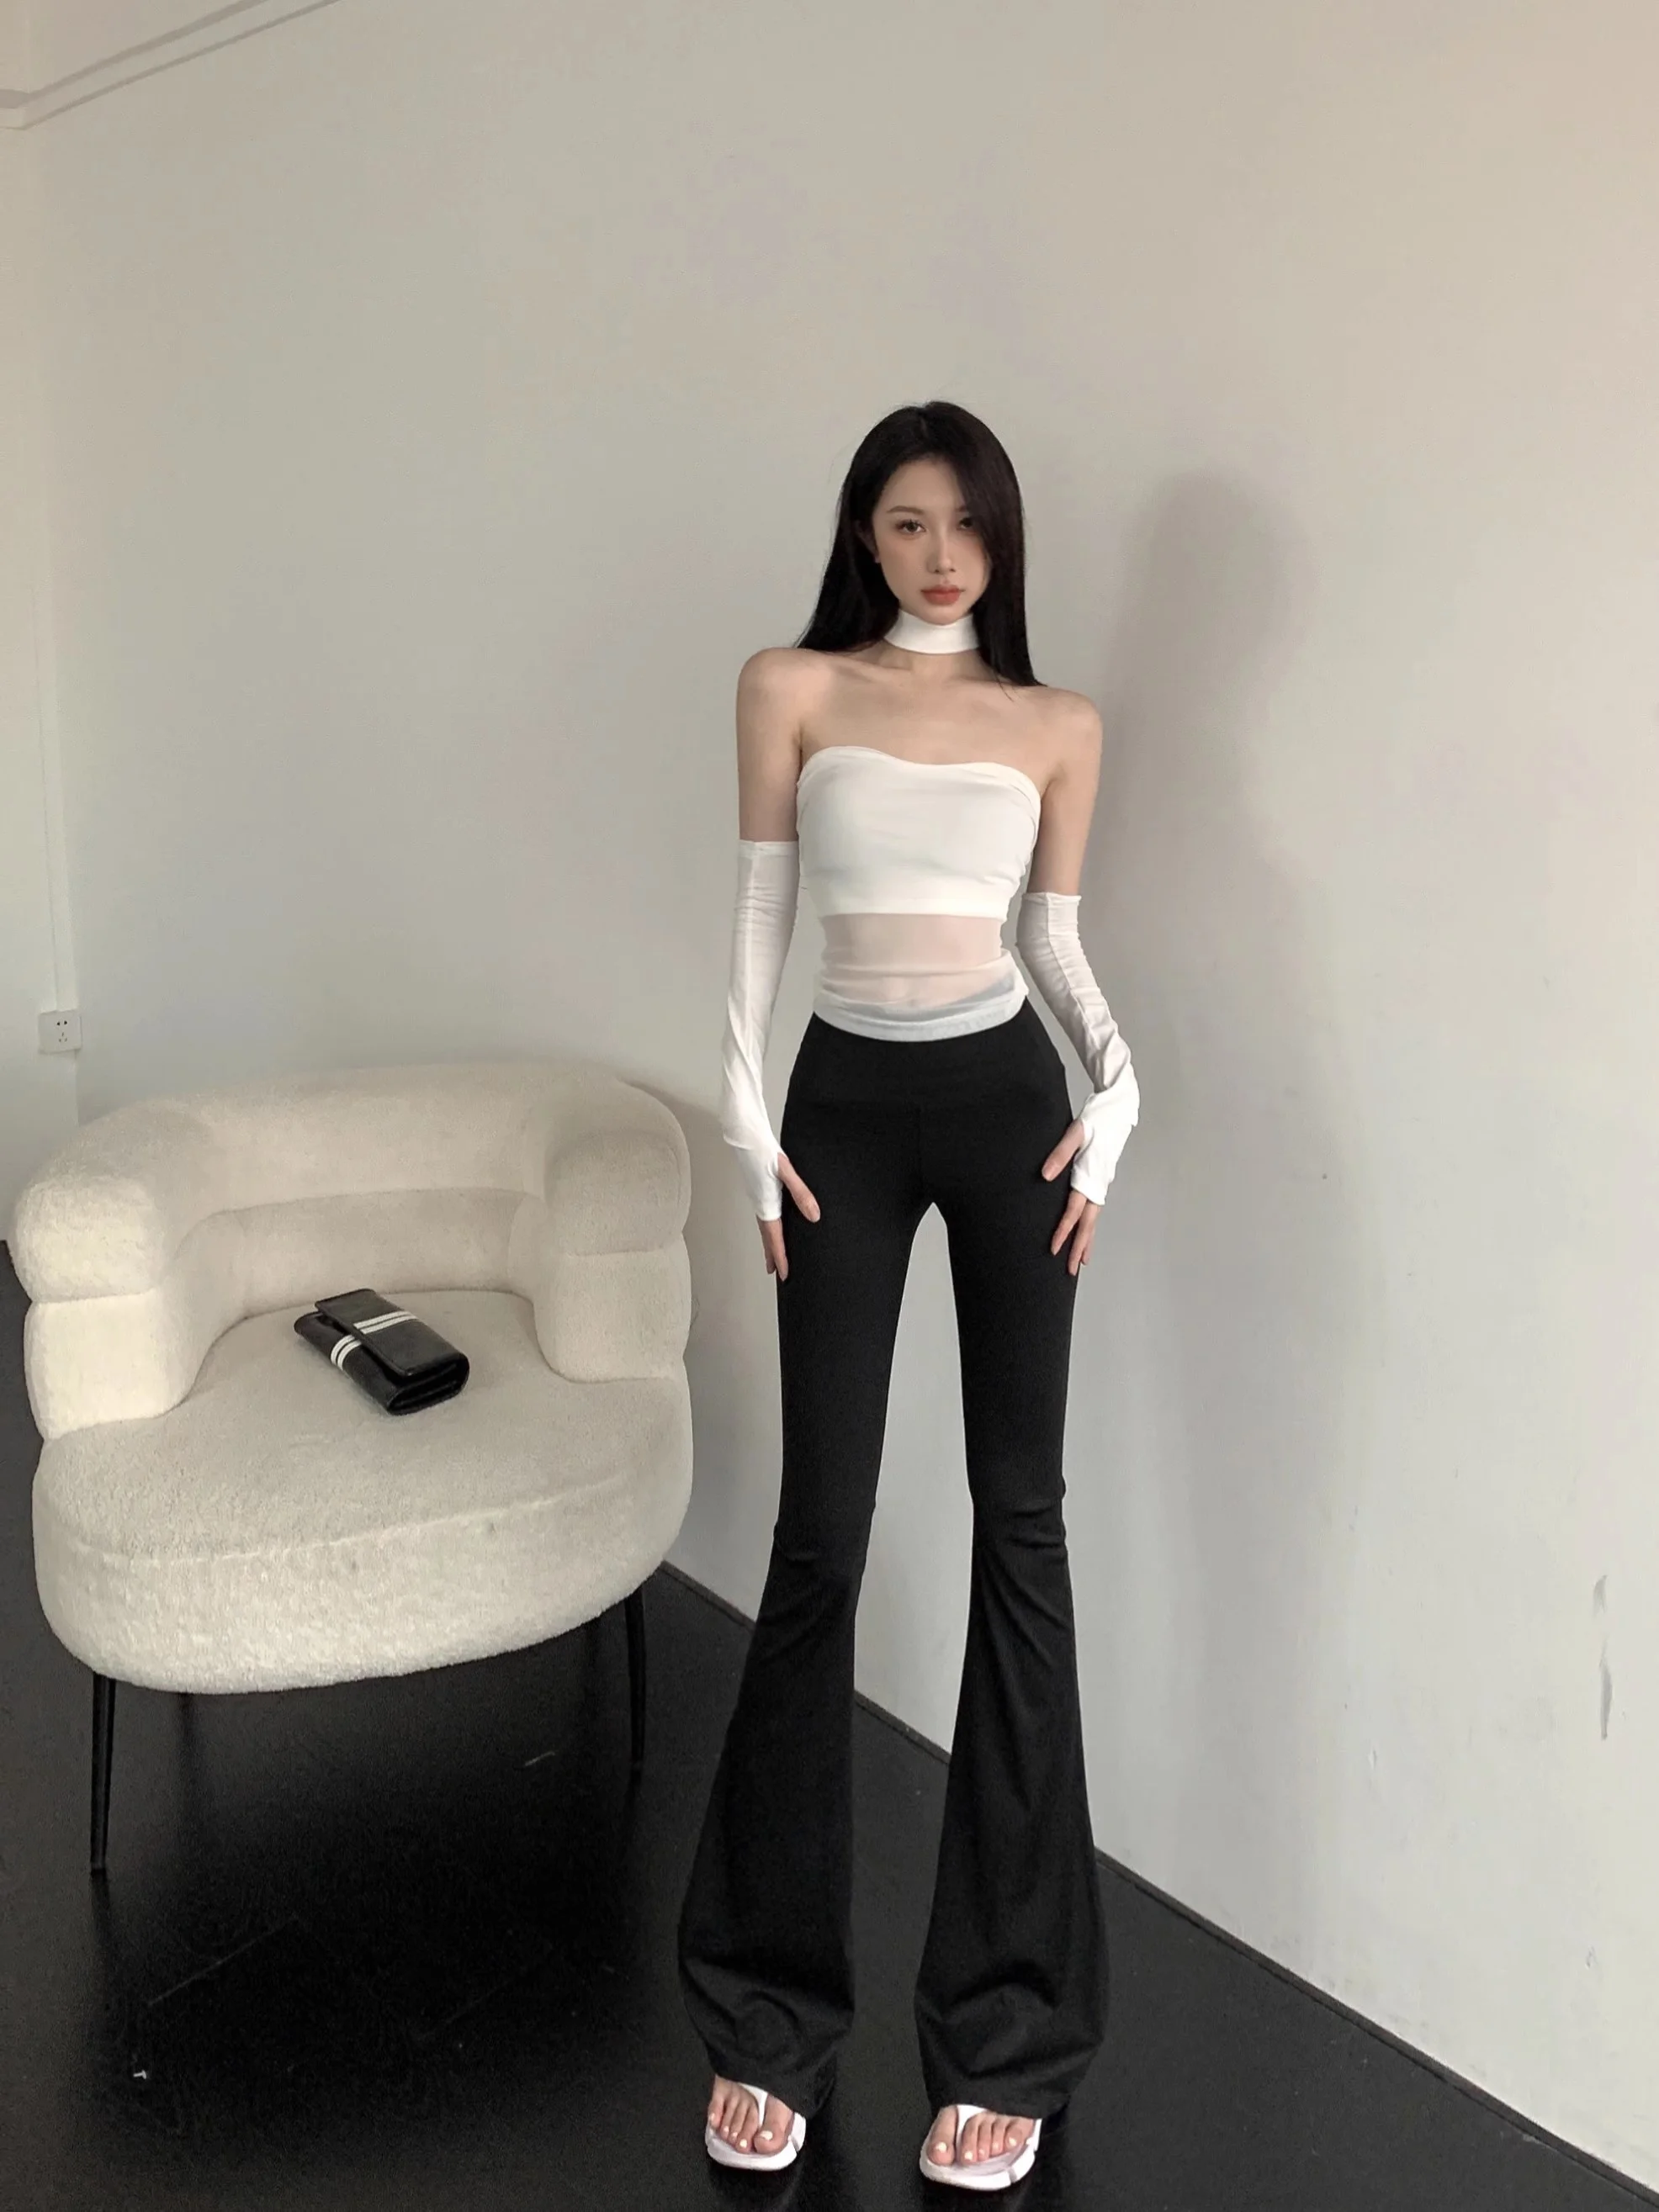 Women High Waist Pants Mesh Splice Bra Sleeve Vest Women's Summer Sexy Tight Wrap Chest Inner Crop Top Outer Wear sexy lingerie mesh see through tight bodysuit women hanging neck backless transparent gauze romper club midnight outfit 2023